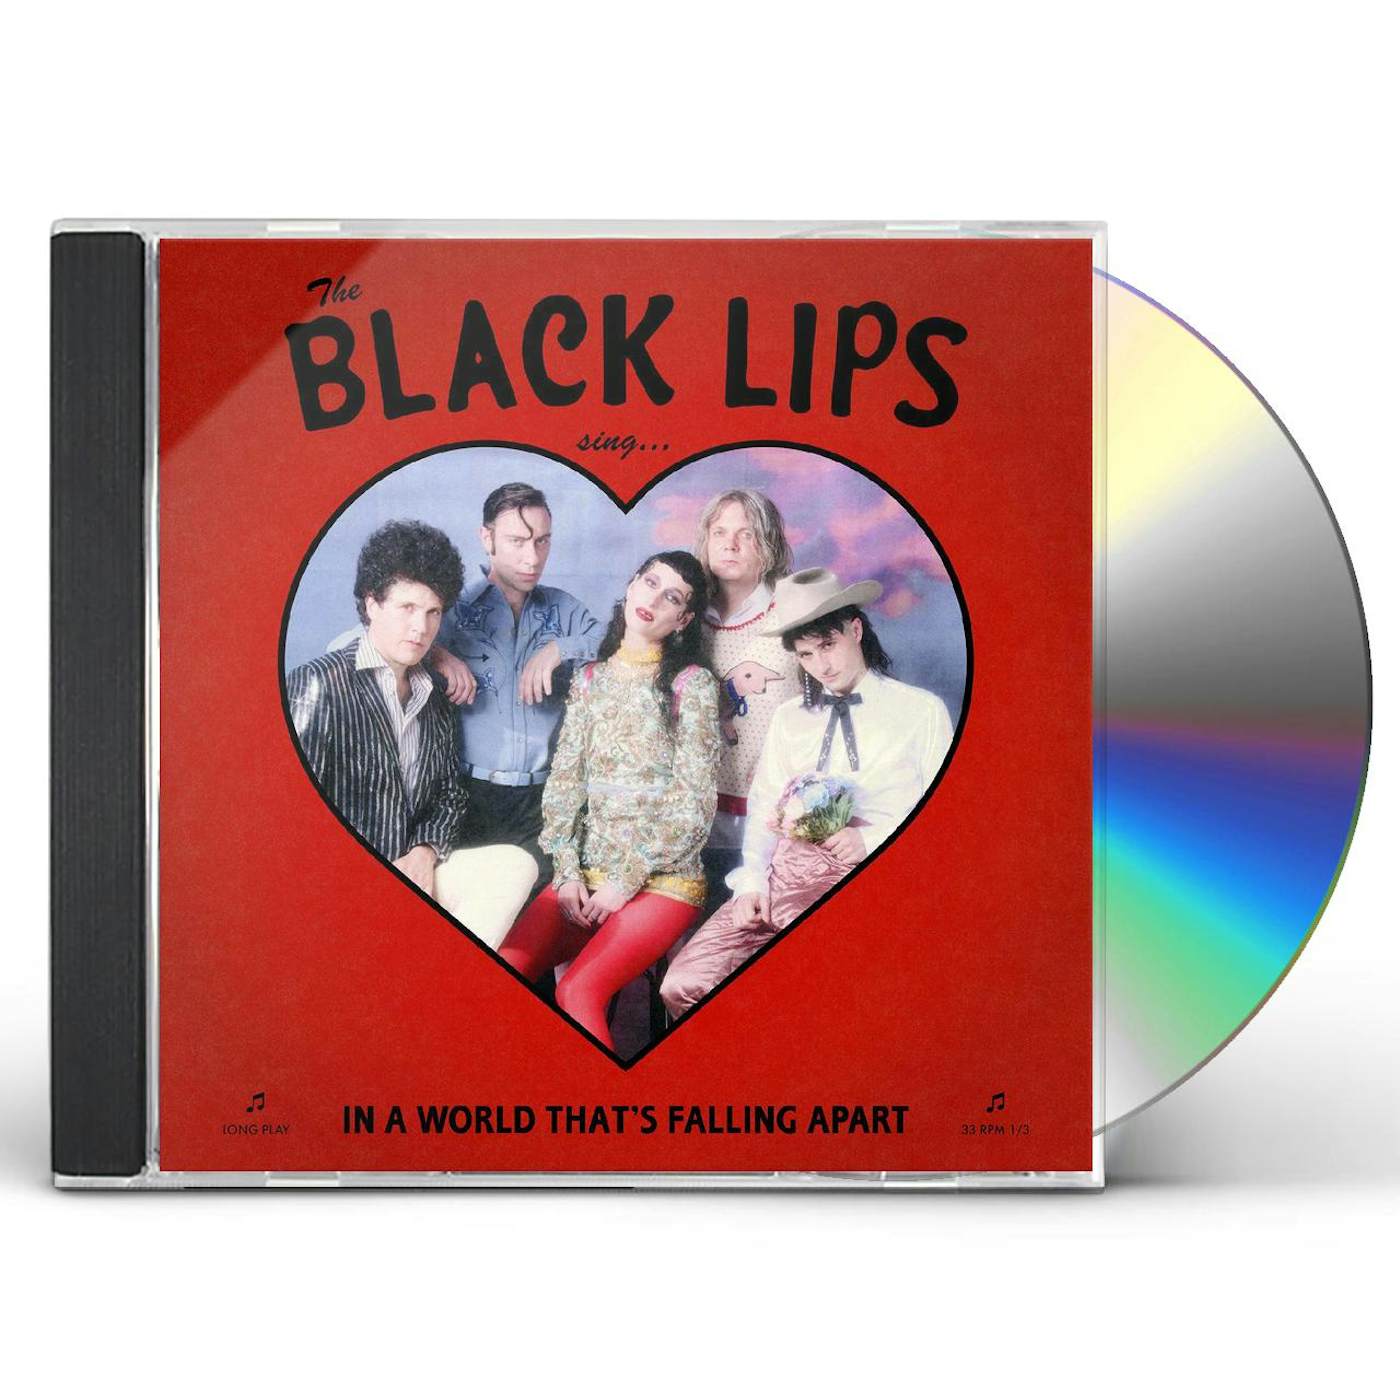 Black Lips SING IN A WORLD THAT'S FALLING APART CD